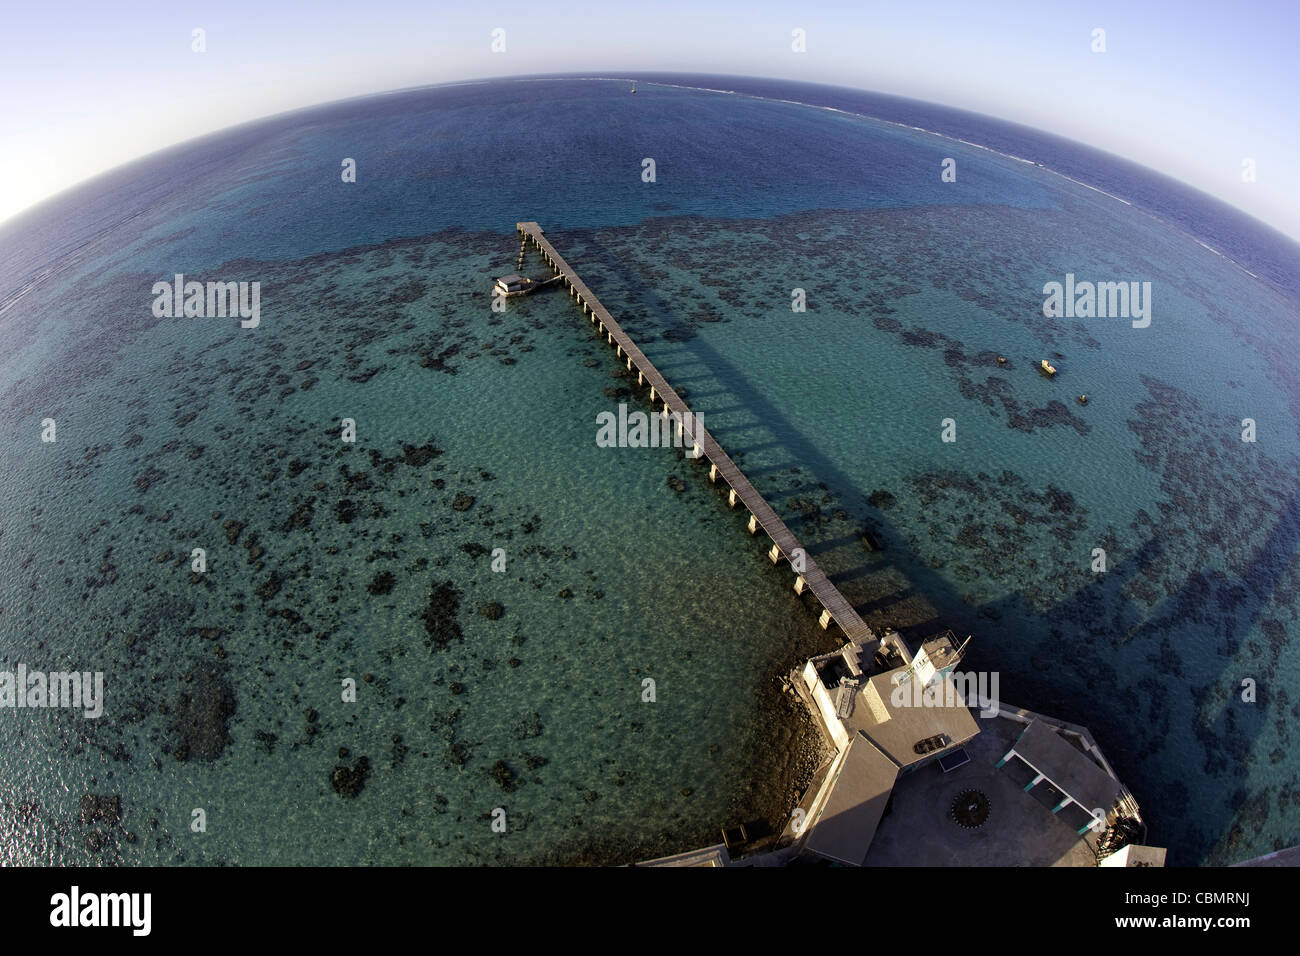 Panoramic View from Lighthouse of Sanganeb Reef, Red Sea, Sudan Stock Photo